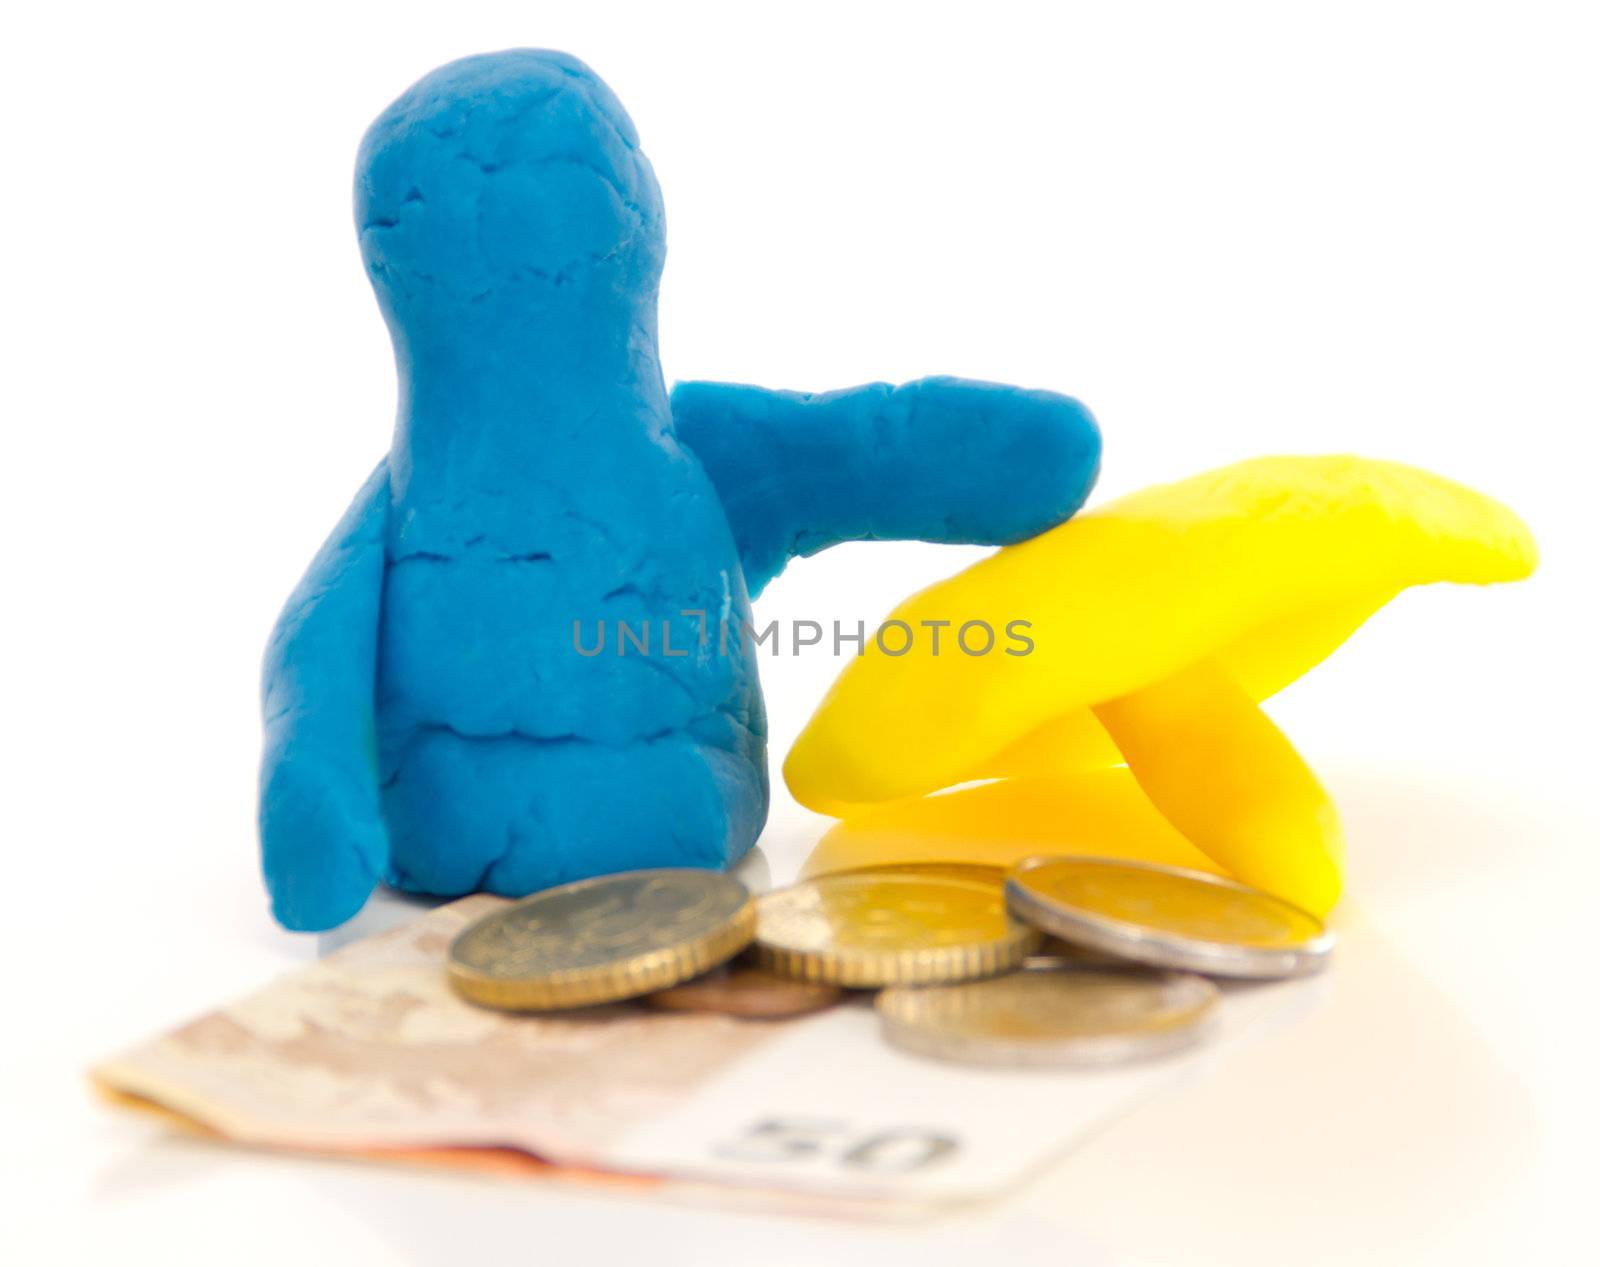 Modelling clay figure with umbrella and money